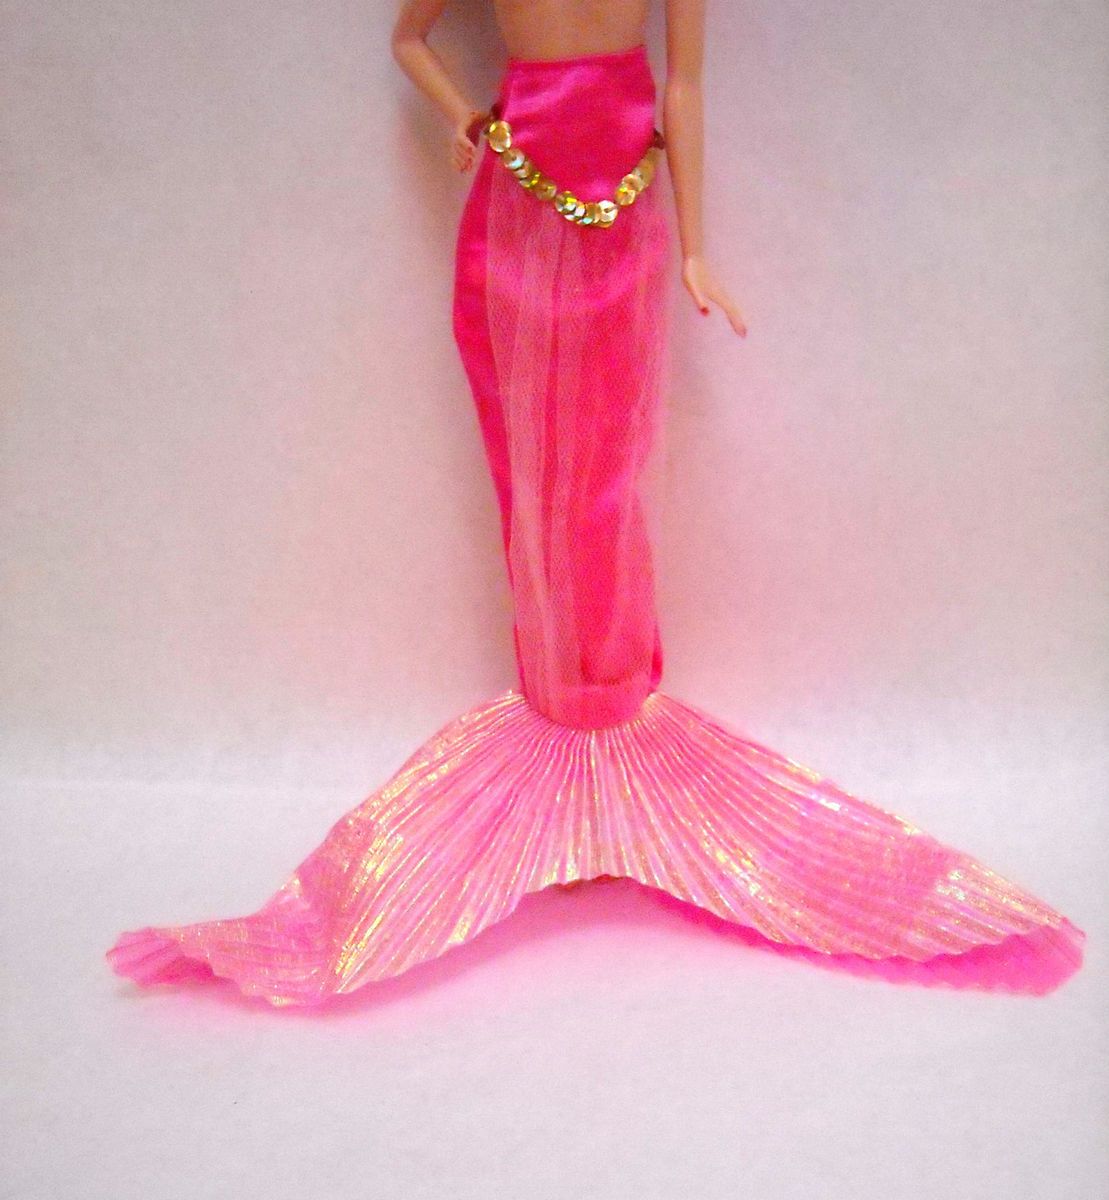 Barbie Doll Clothing Mermaid Tail Fin Skirt Hot Pink Gold White 